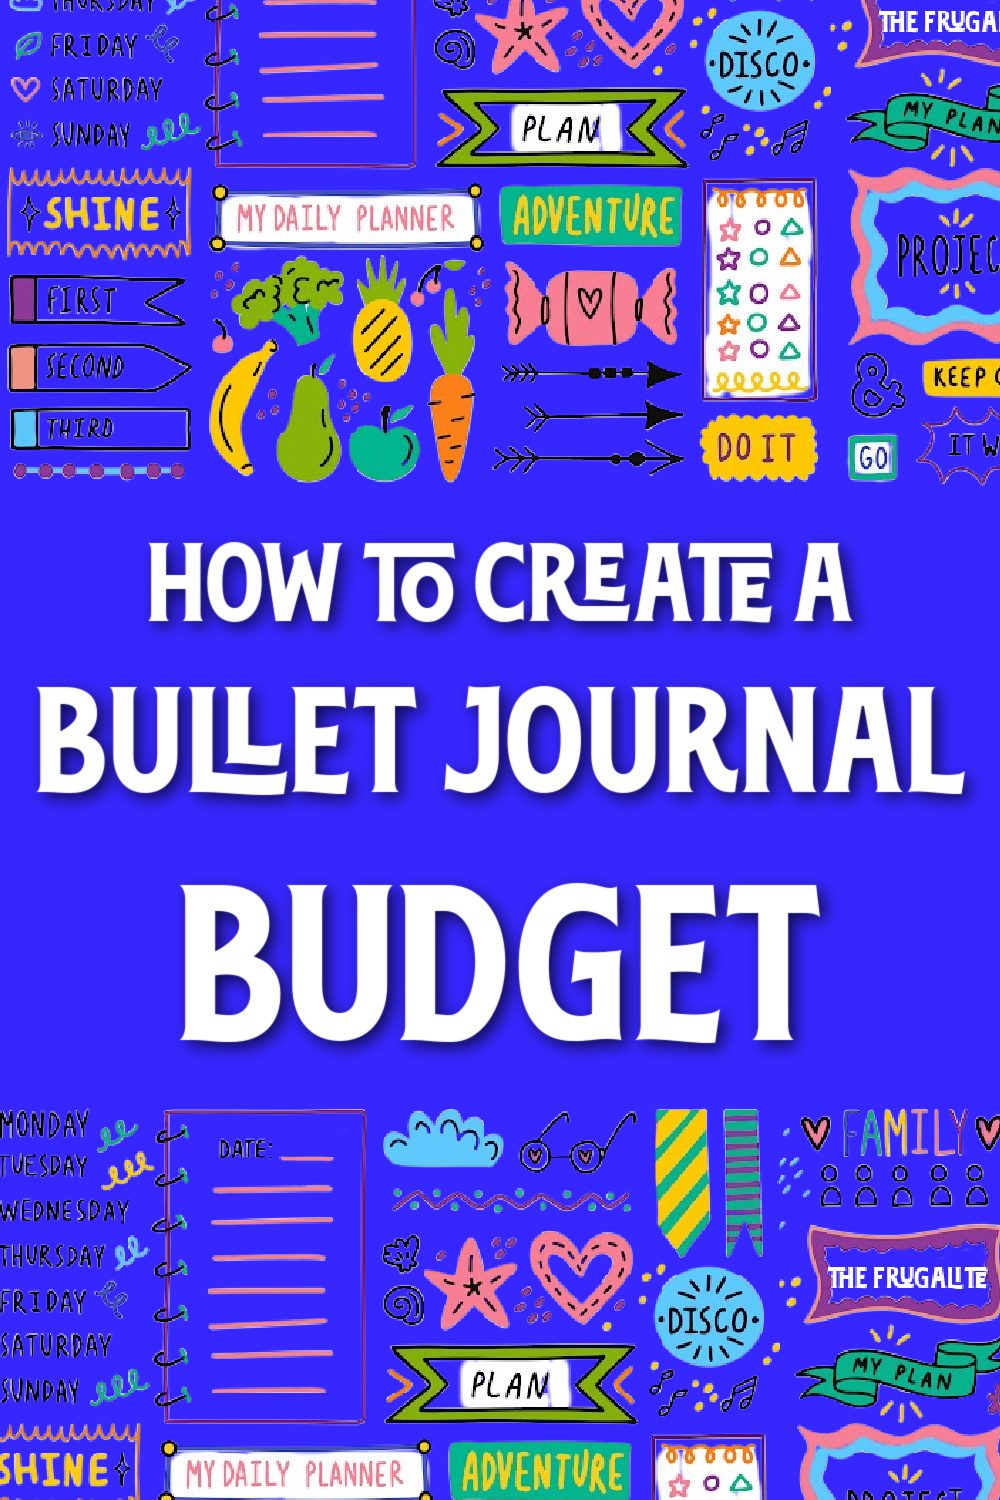 How to Create a Bullet Journal Budget